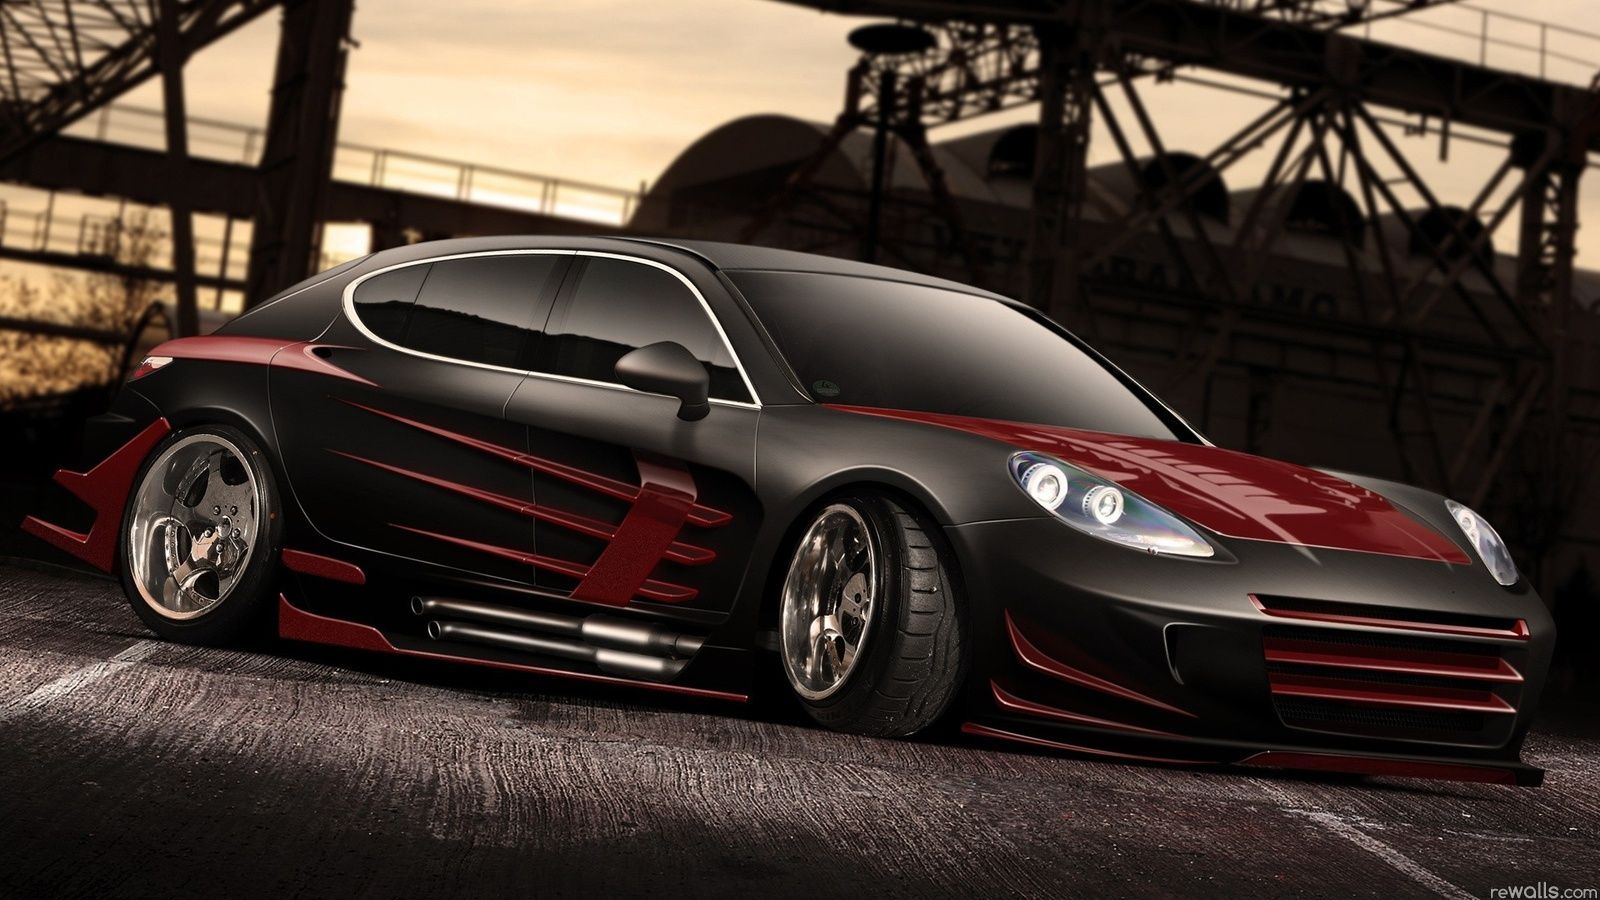 Tuning Cars Wallpaper Hd - HD Wallpapers and Pictures